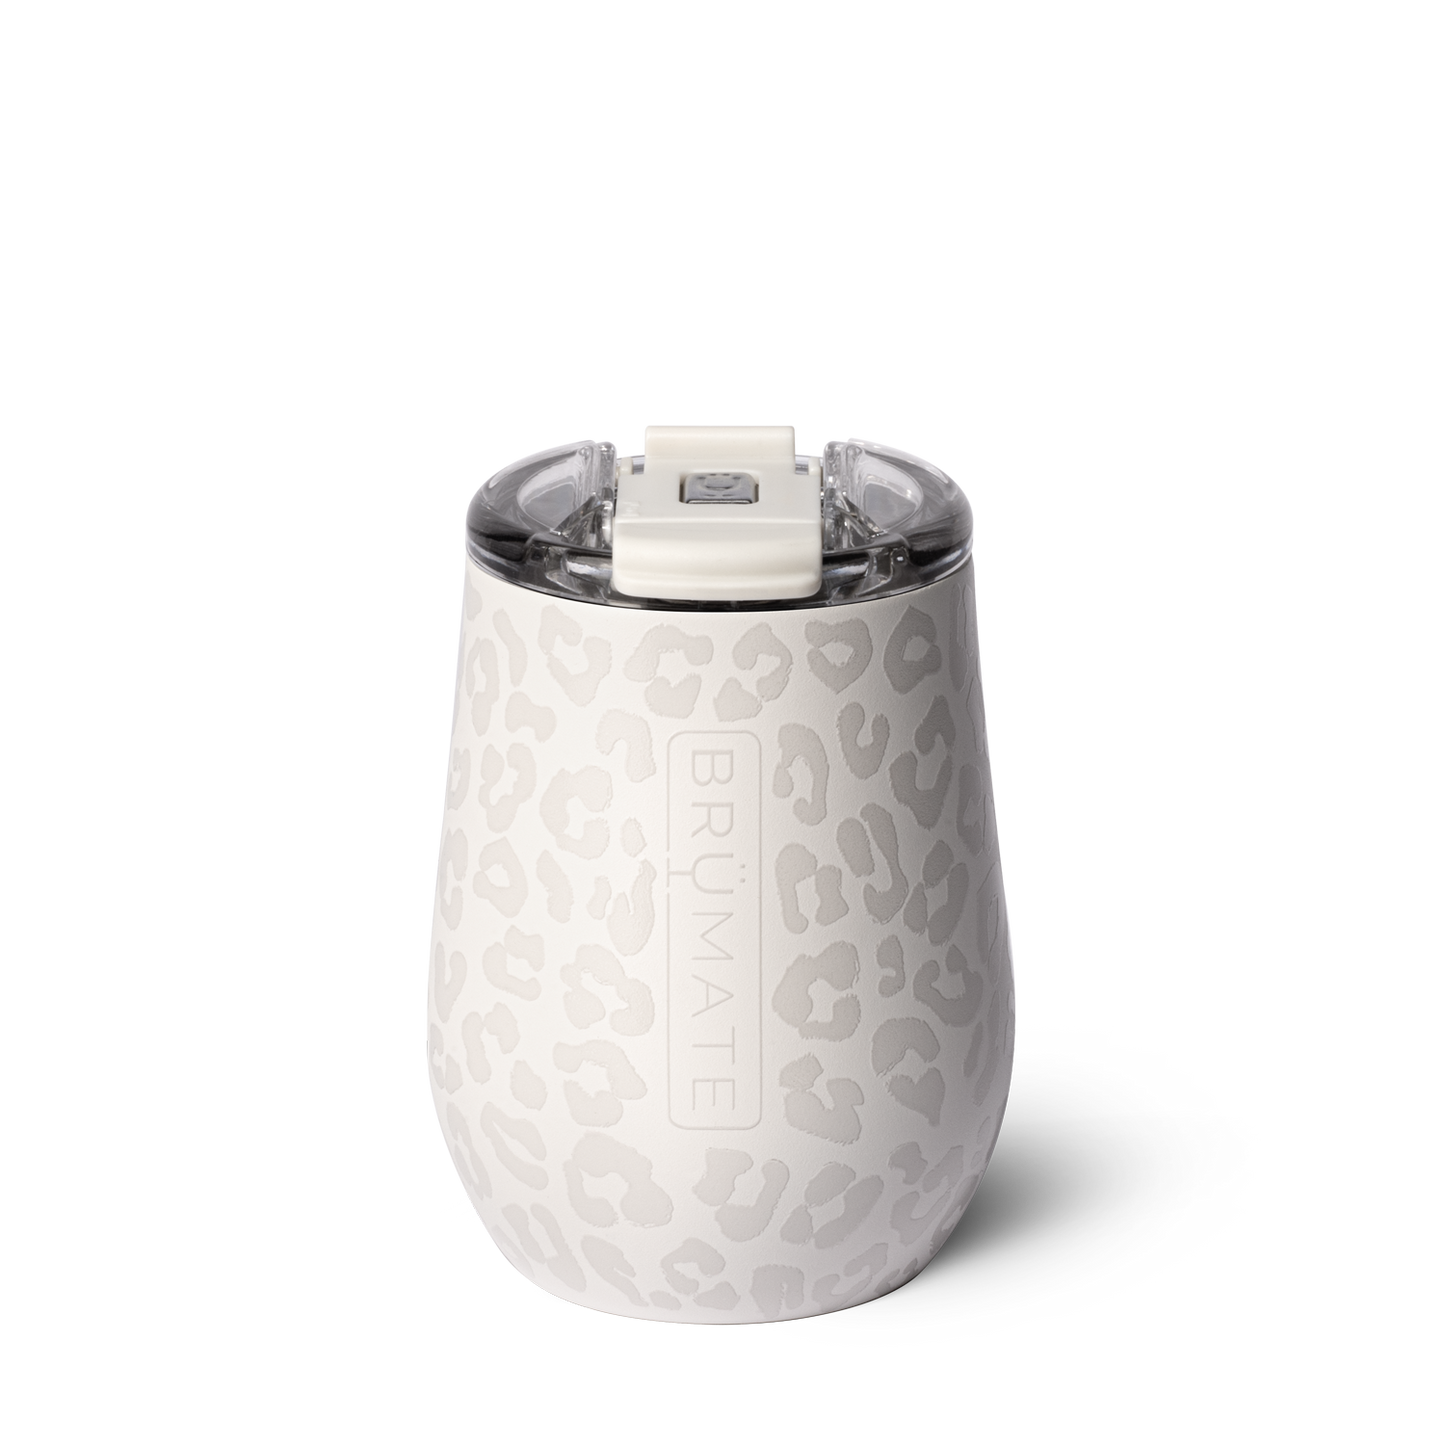 limestone leopard wine tumbler is white with gray leopard spots all over against a white background